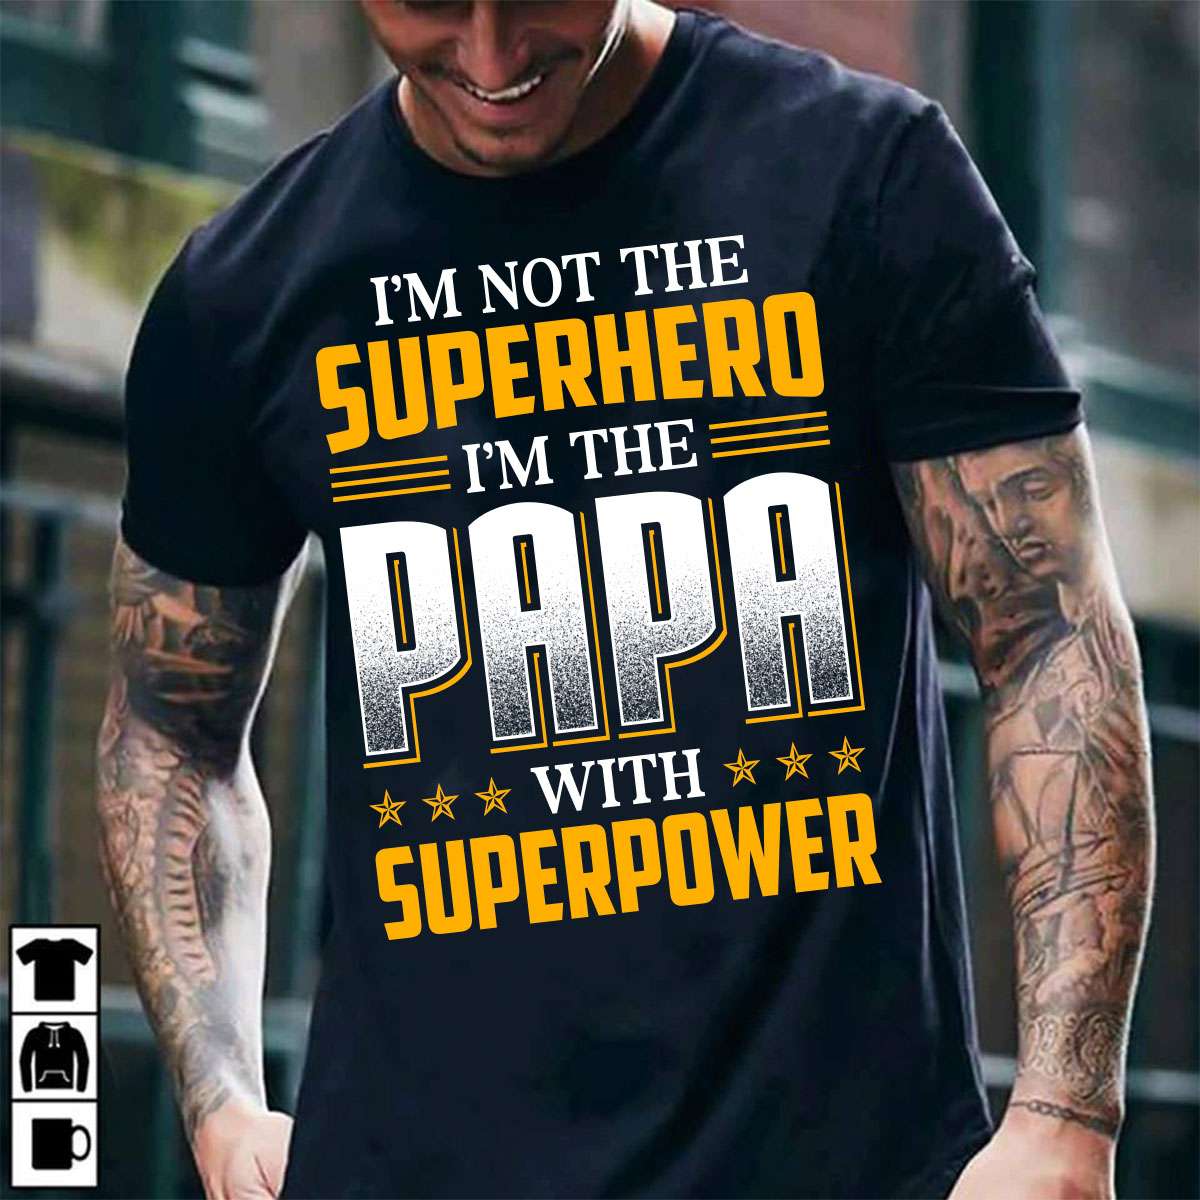 I'm not the superhero I'm the papa with superpower - Grandpa has superpower